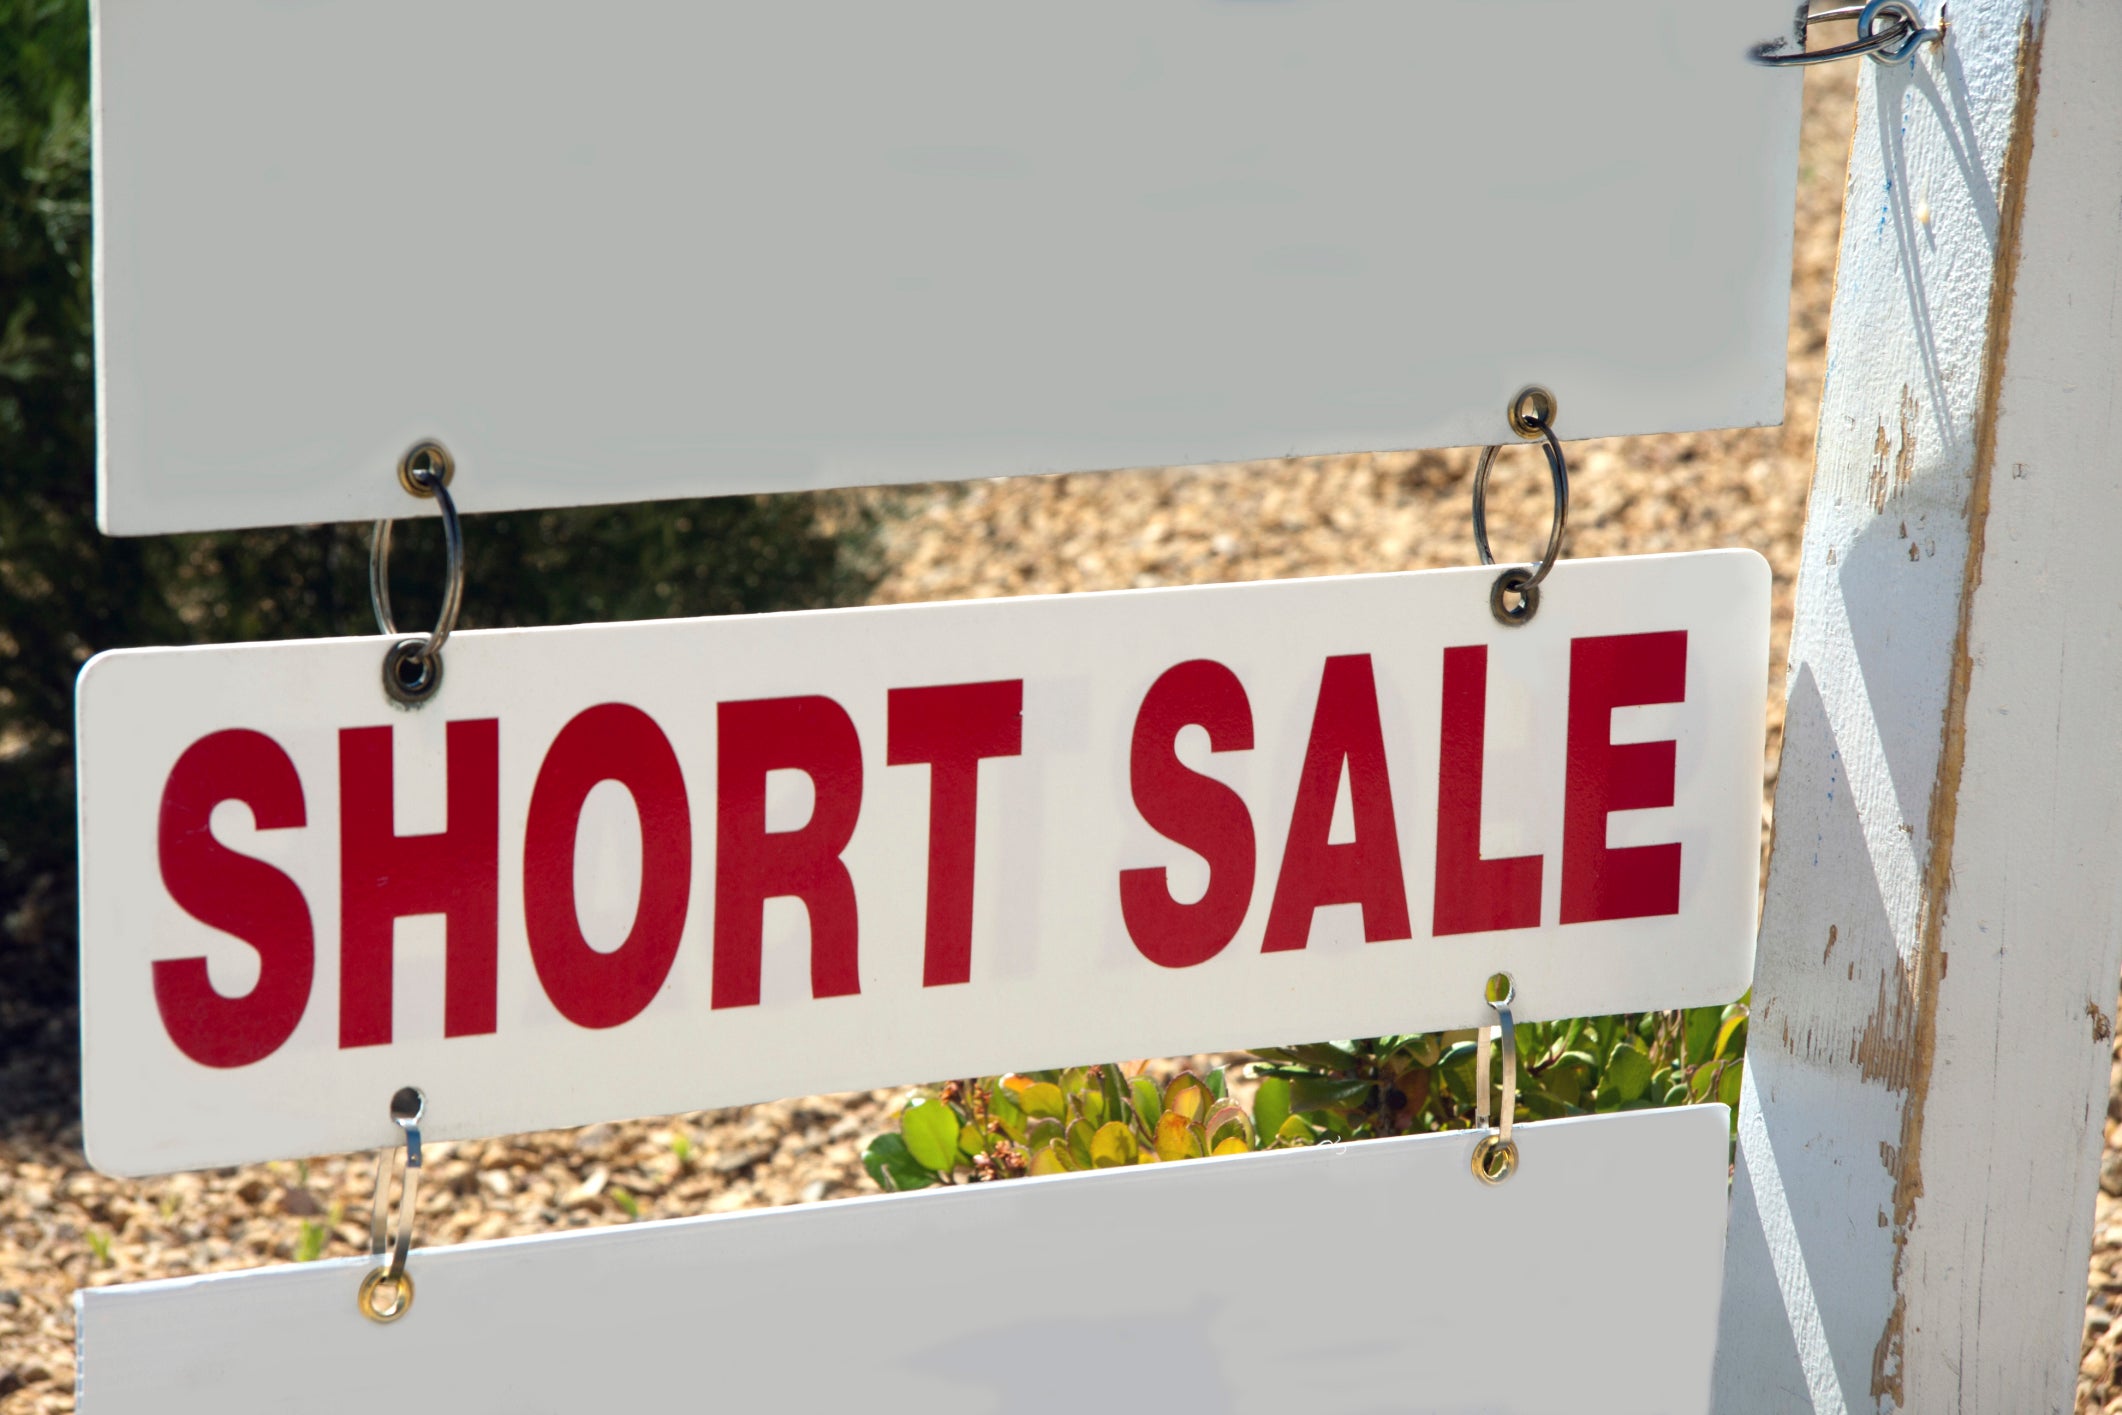 How I Can Get My Short Sale to Not Affect My Credit Score?